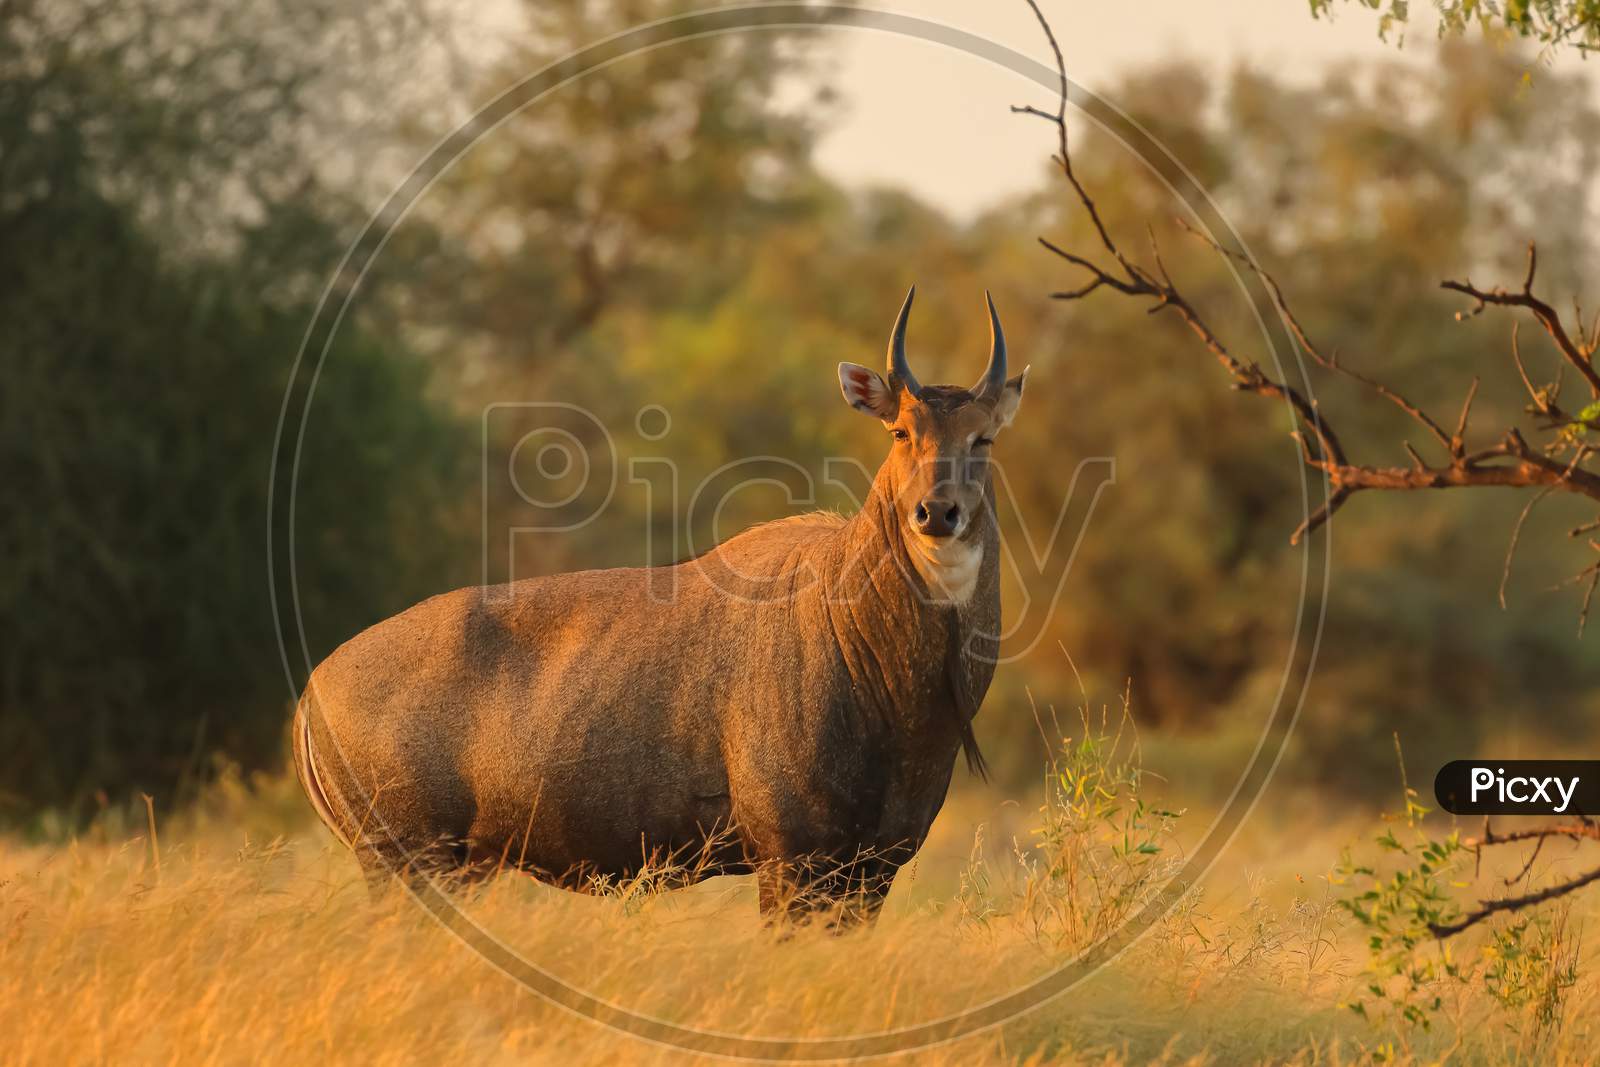 An adult Blue bull largest antelope in India also called Nilgai